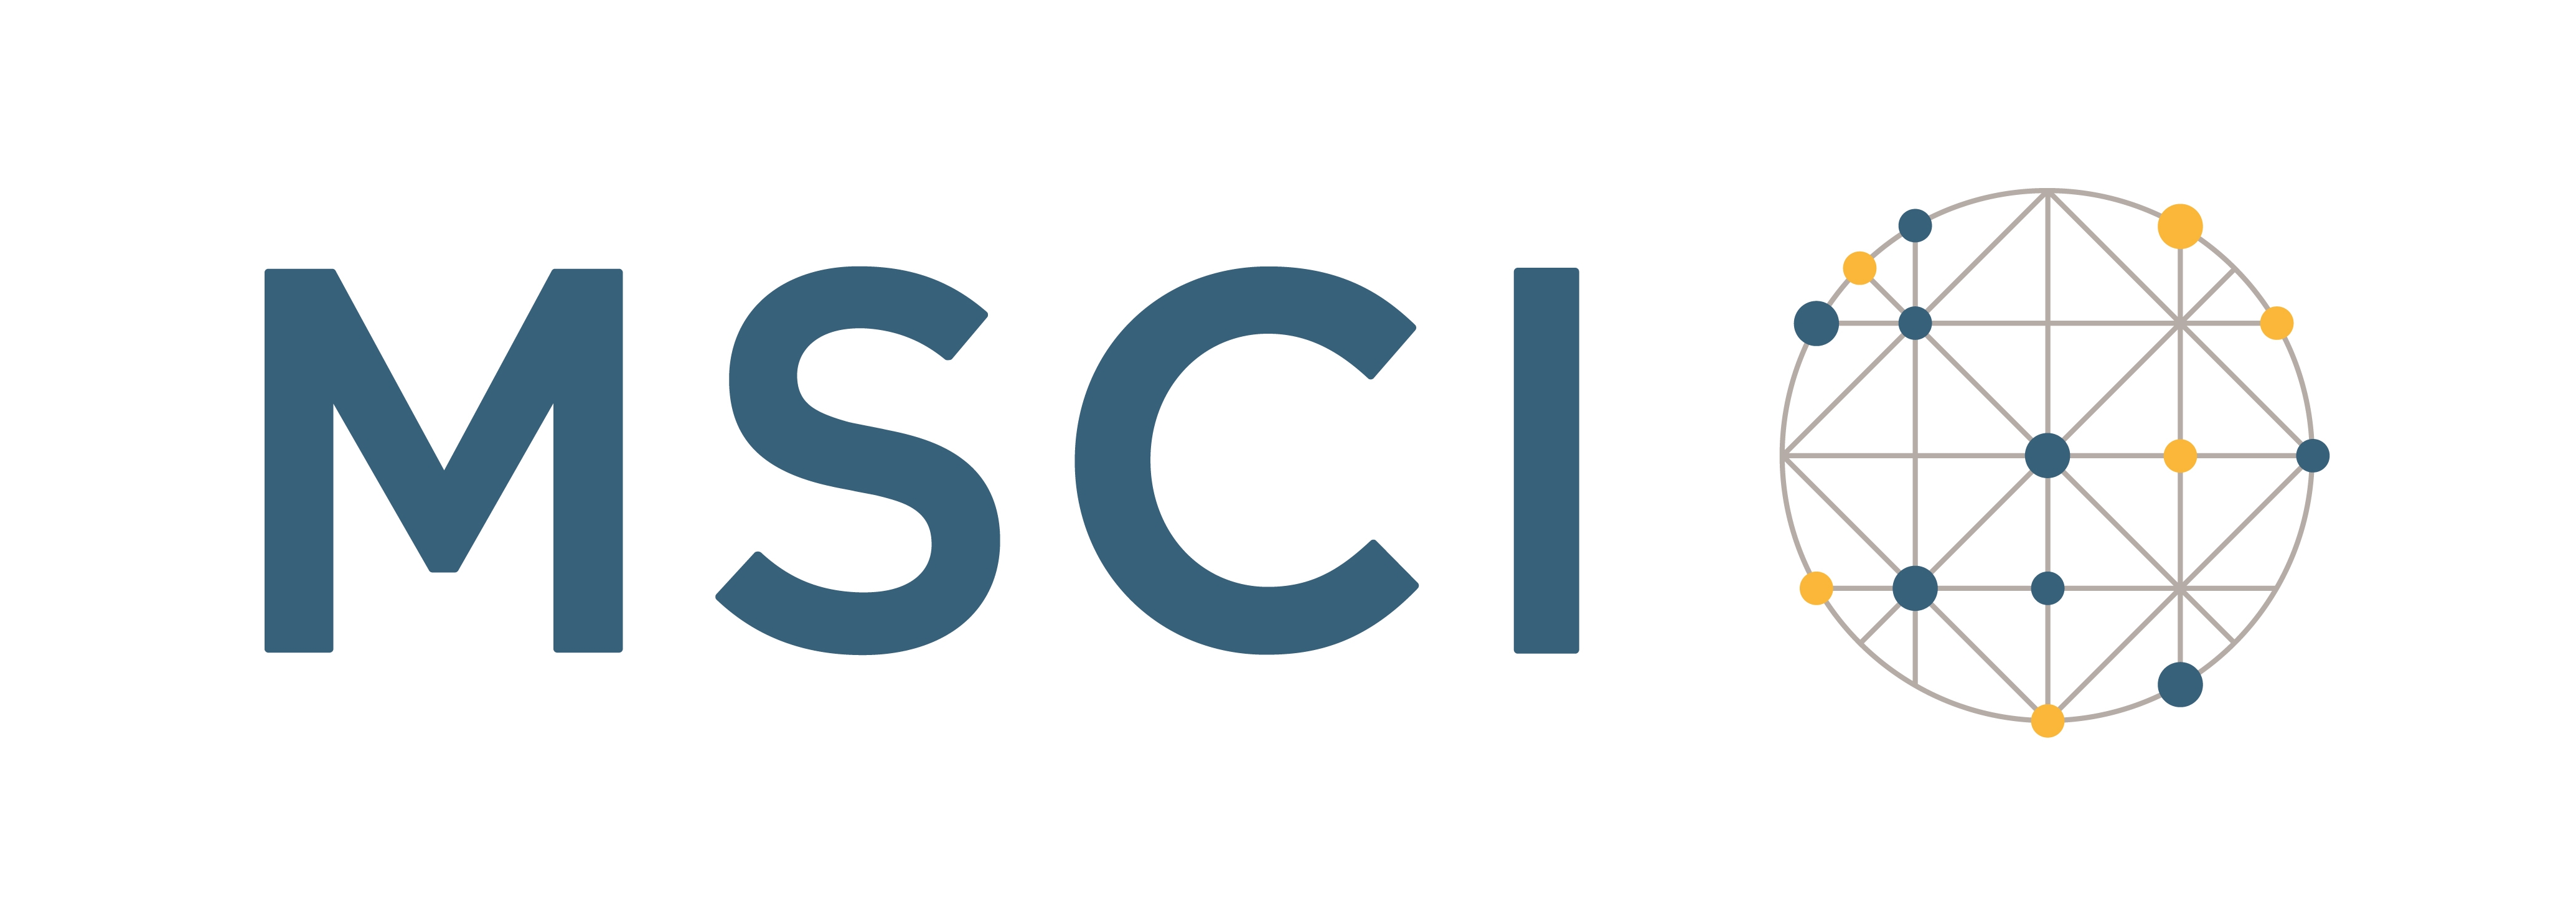 MSCI Creates Factor Classification Standard by Launching MSCI FaCS and ...